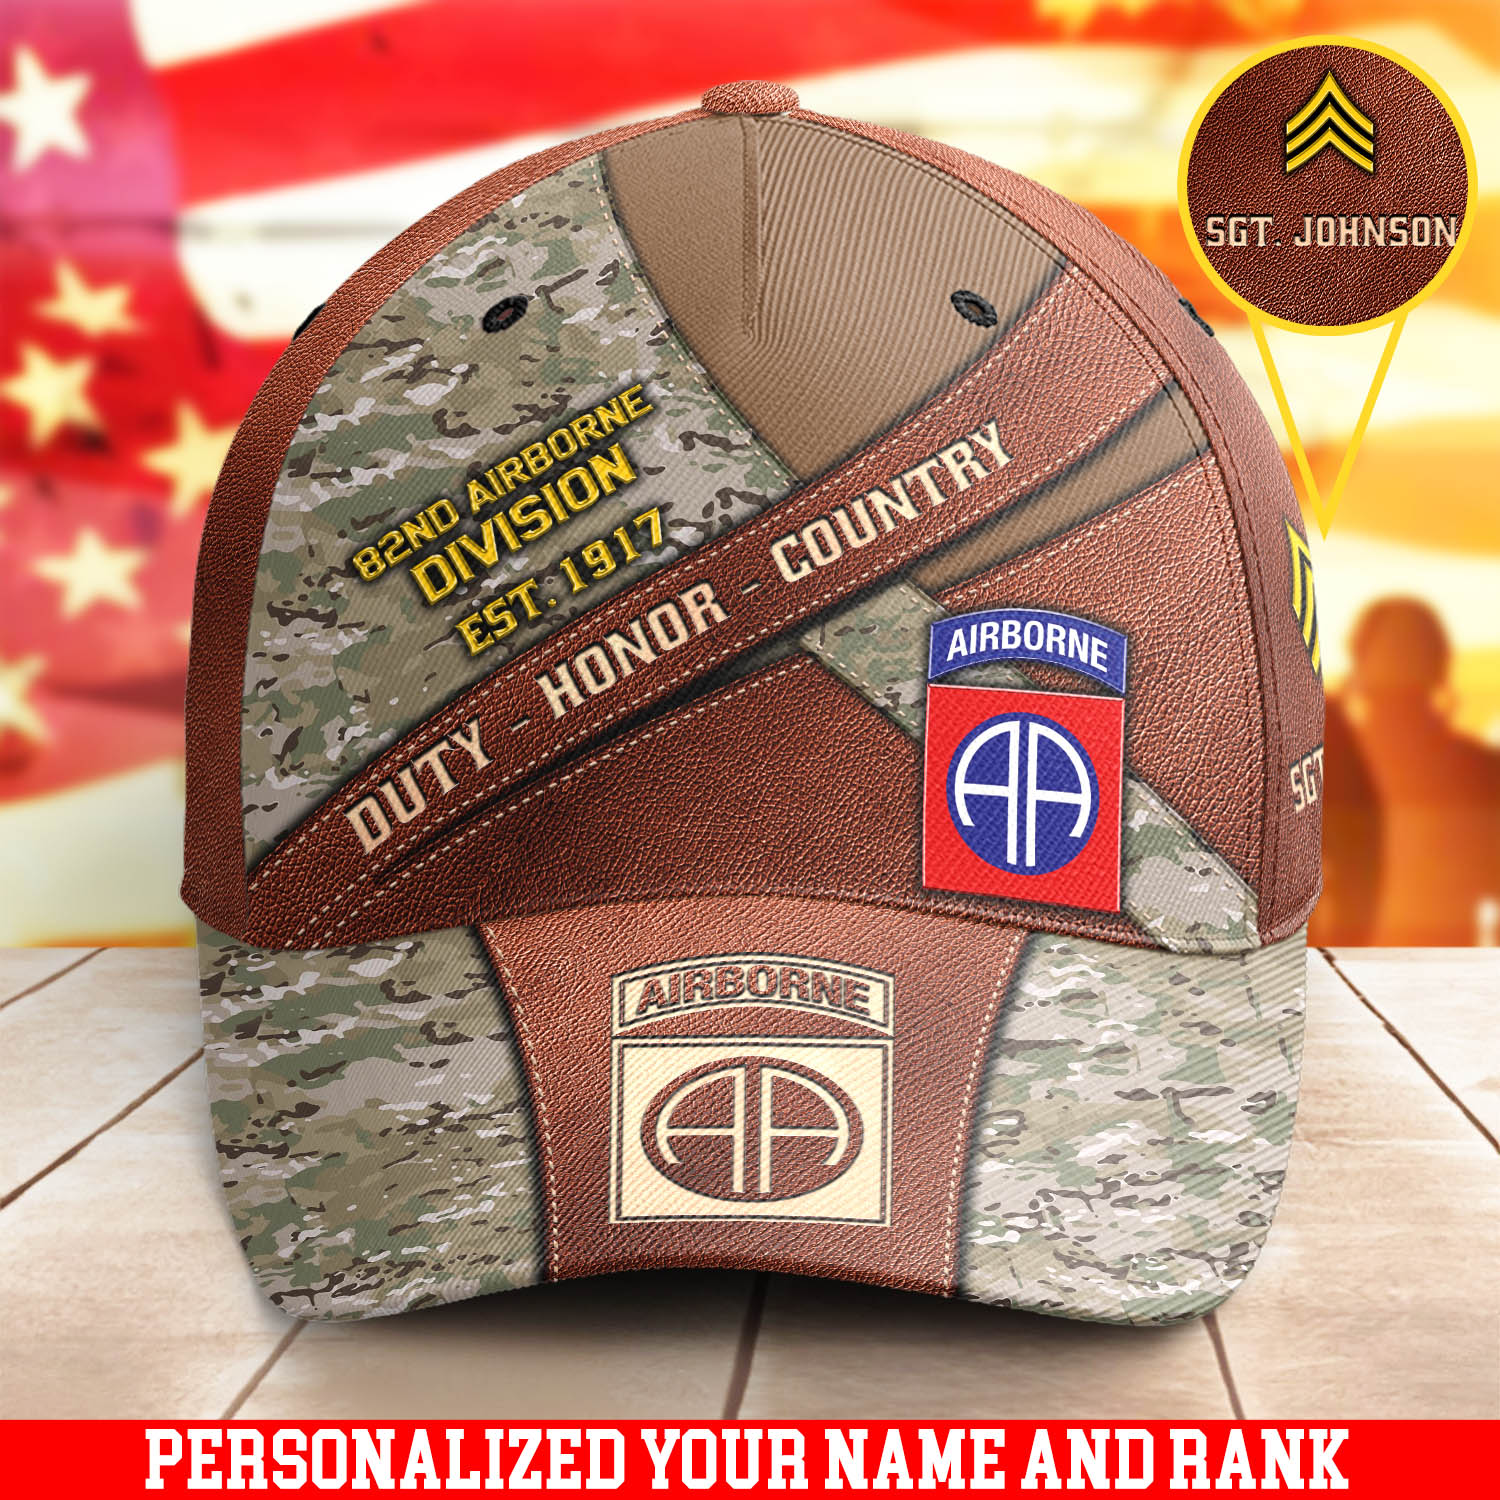 82nd Airborne Cap New Version Personalized Your Name And Rank, Camouflage Cap For US Military, US Military Gifts ETHY-57782